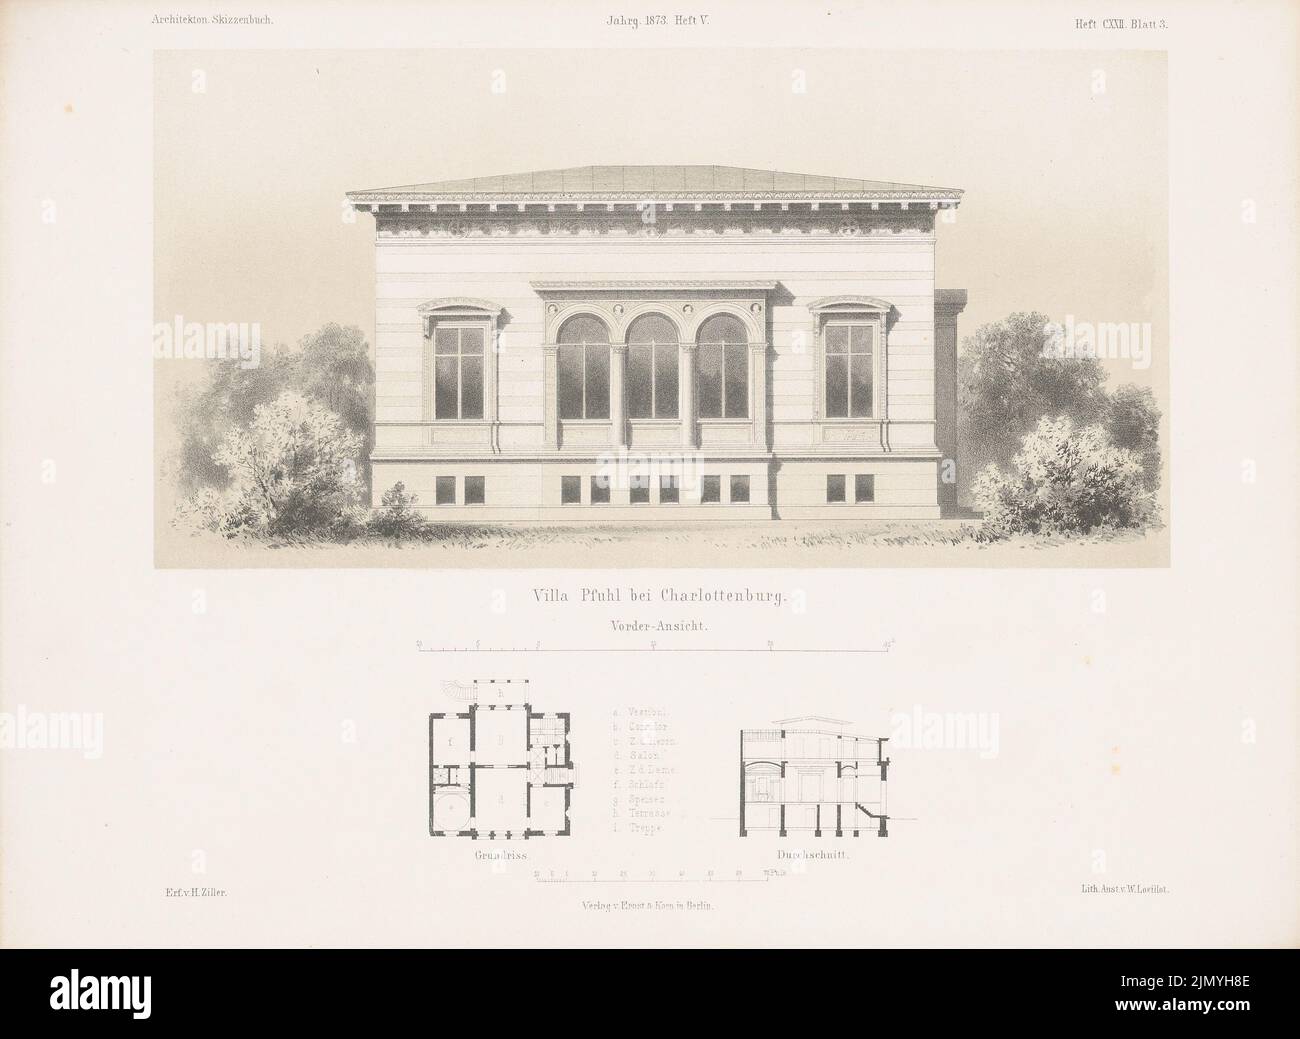 Ziller Hermann (1843-1915), Villa Pfuhl, Berlin-Charlottenburg. (From: Architectural sketchbook, H.122/5, 1873.) (1873-1873): floor plan, view from the front, cut. Lithography colored on paper, 25.2 x 34.6 cm (including scan edges) Stock Photo